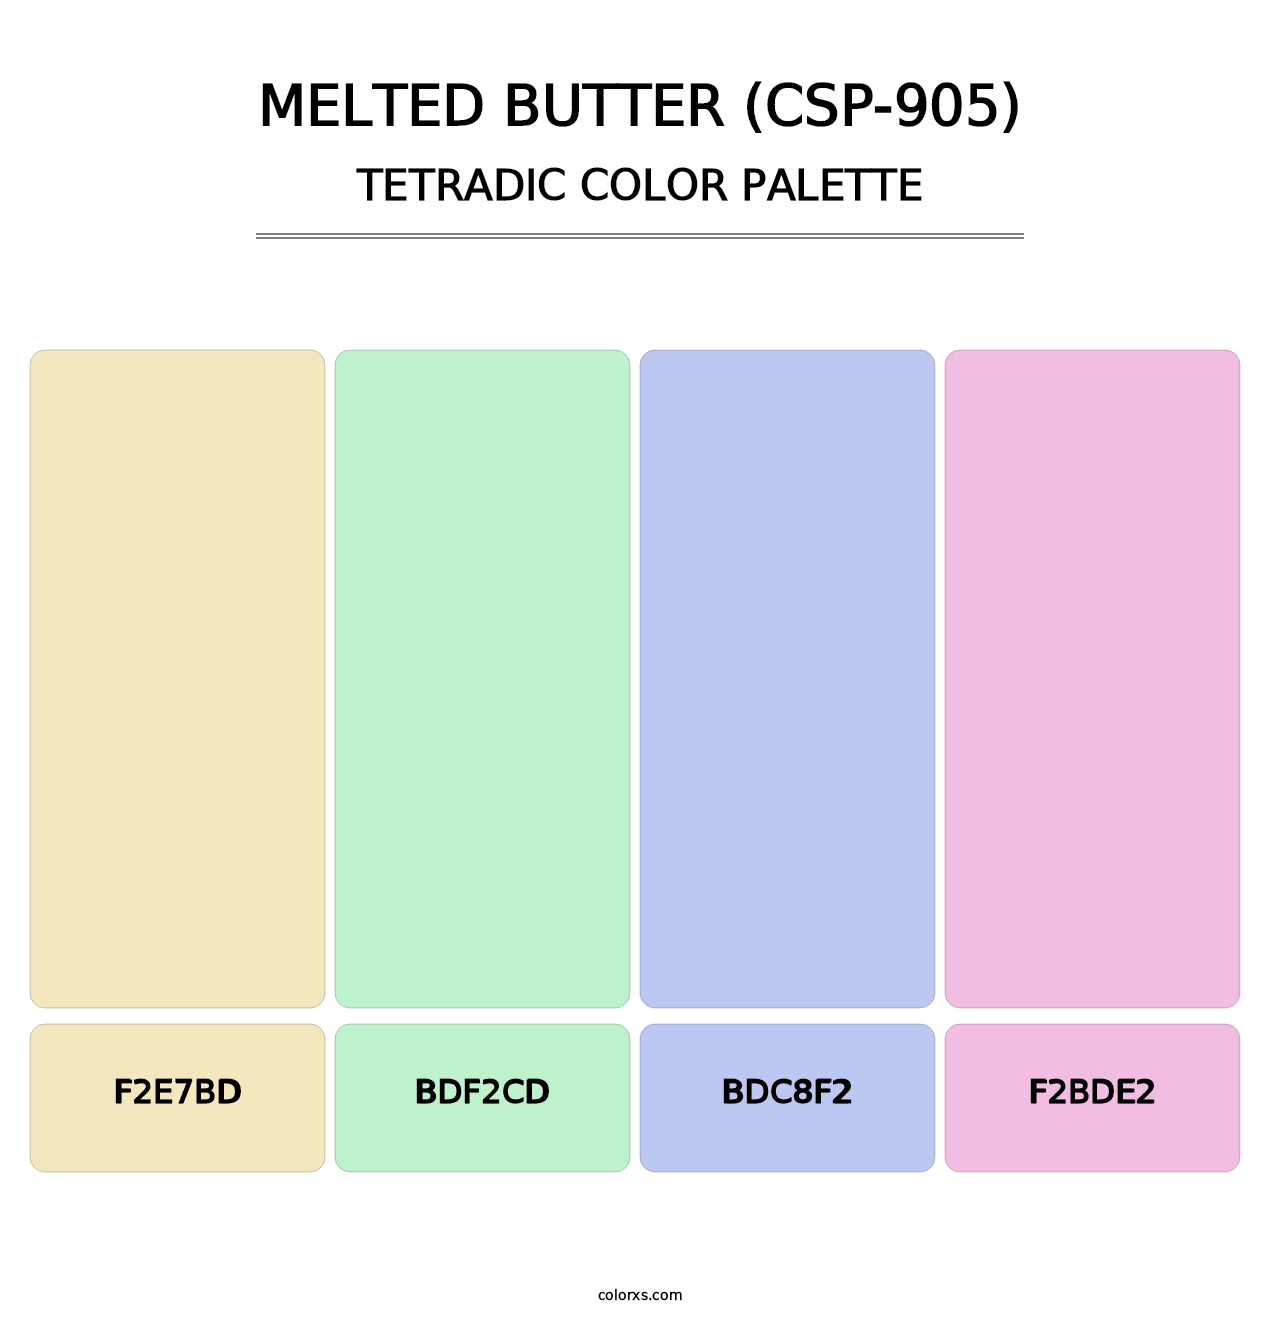 Melted Butter (CSP-905) - Tetradic Color Palette